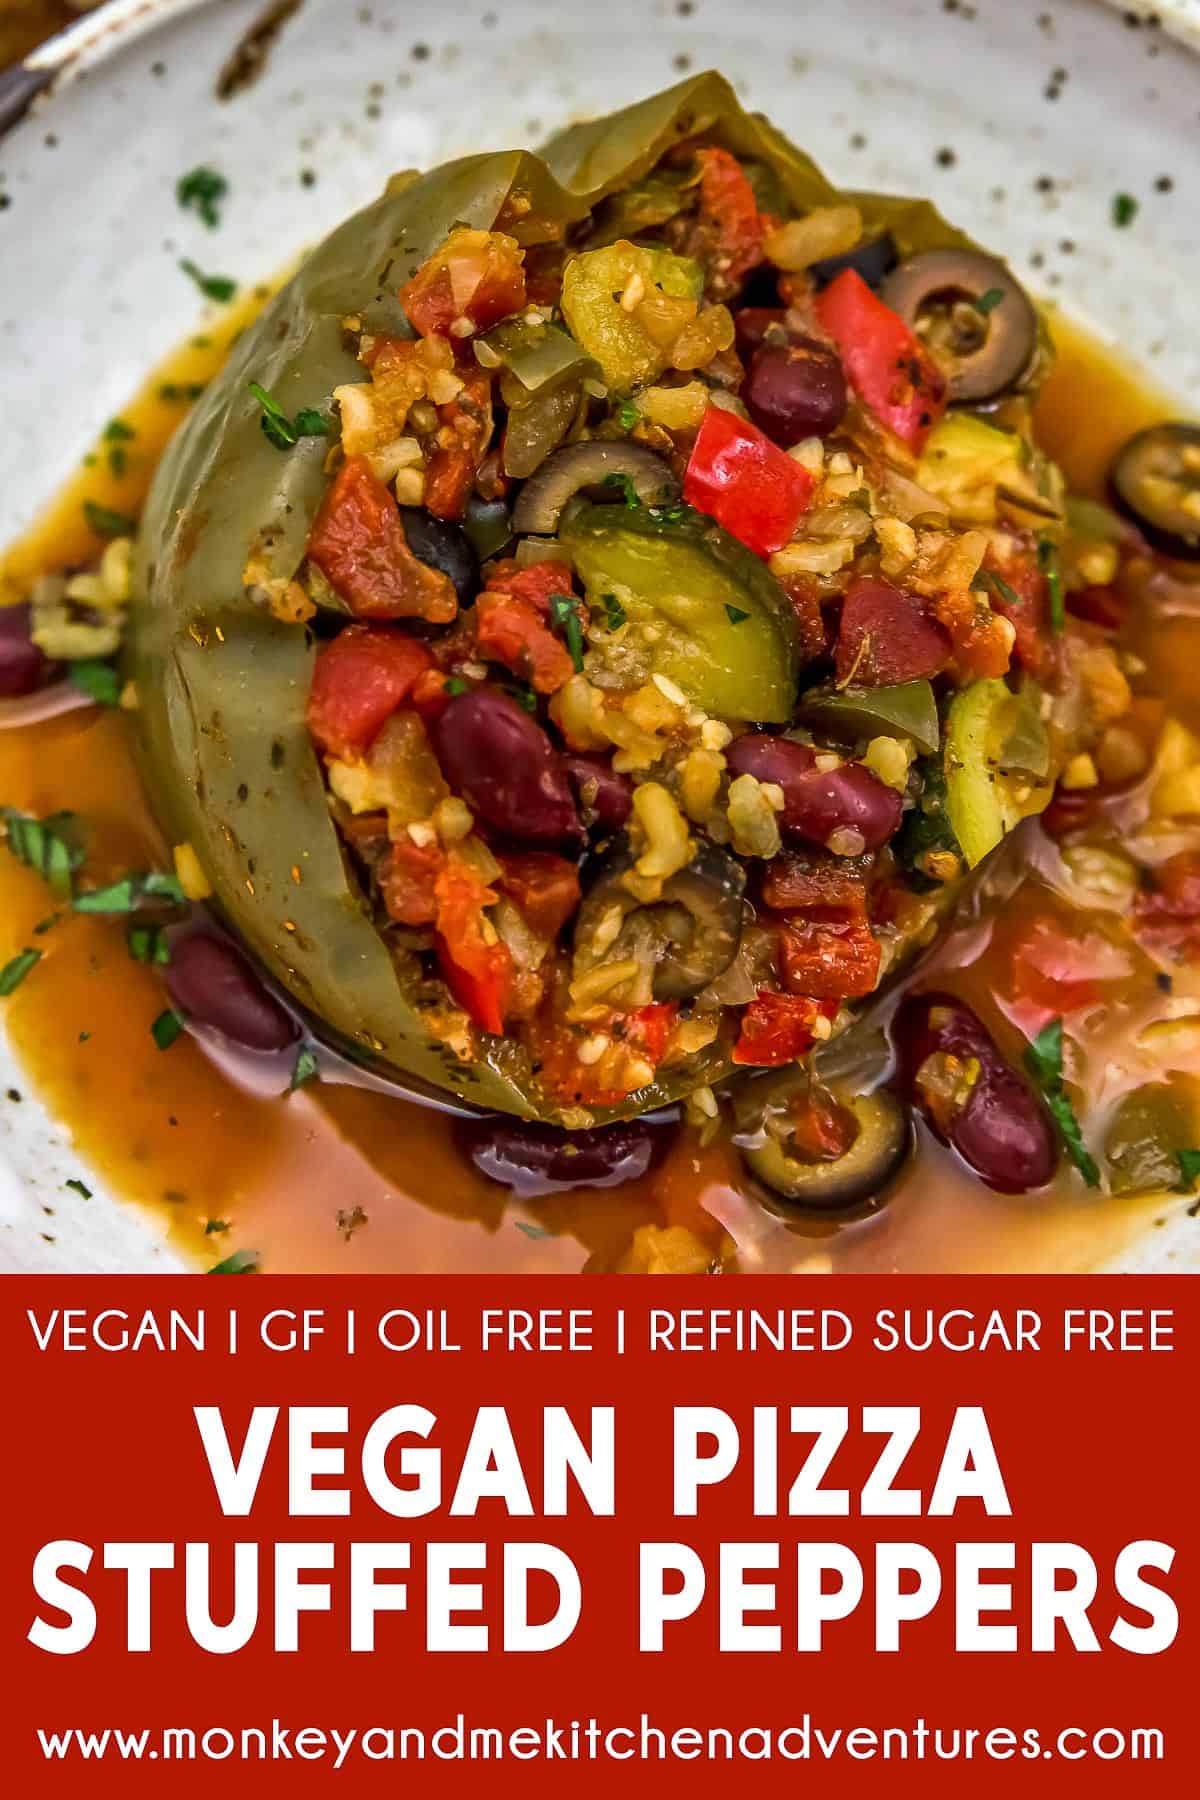 Vegan Pizza Stuffed Peppers with text description